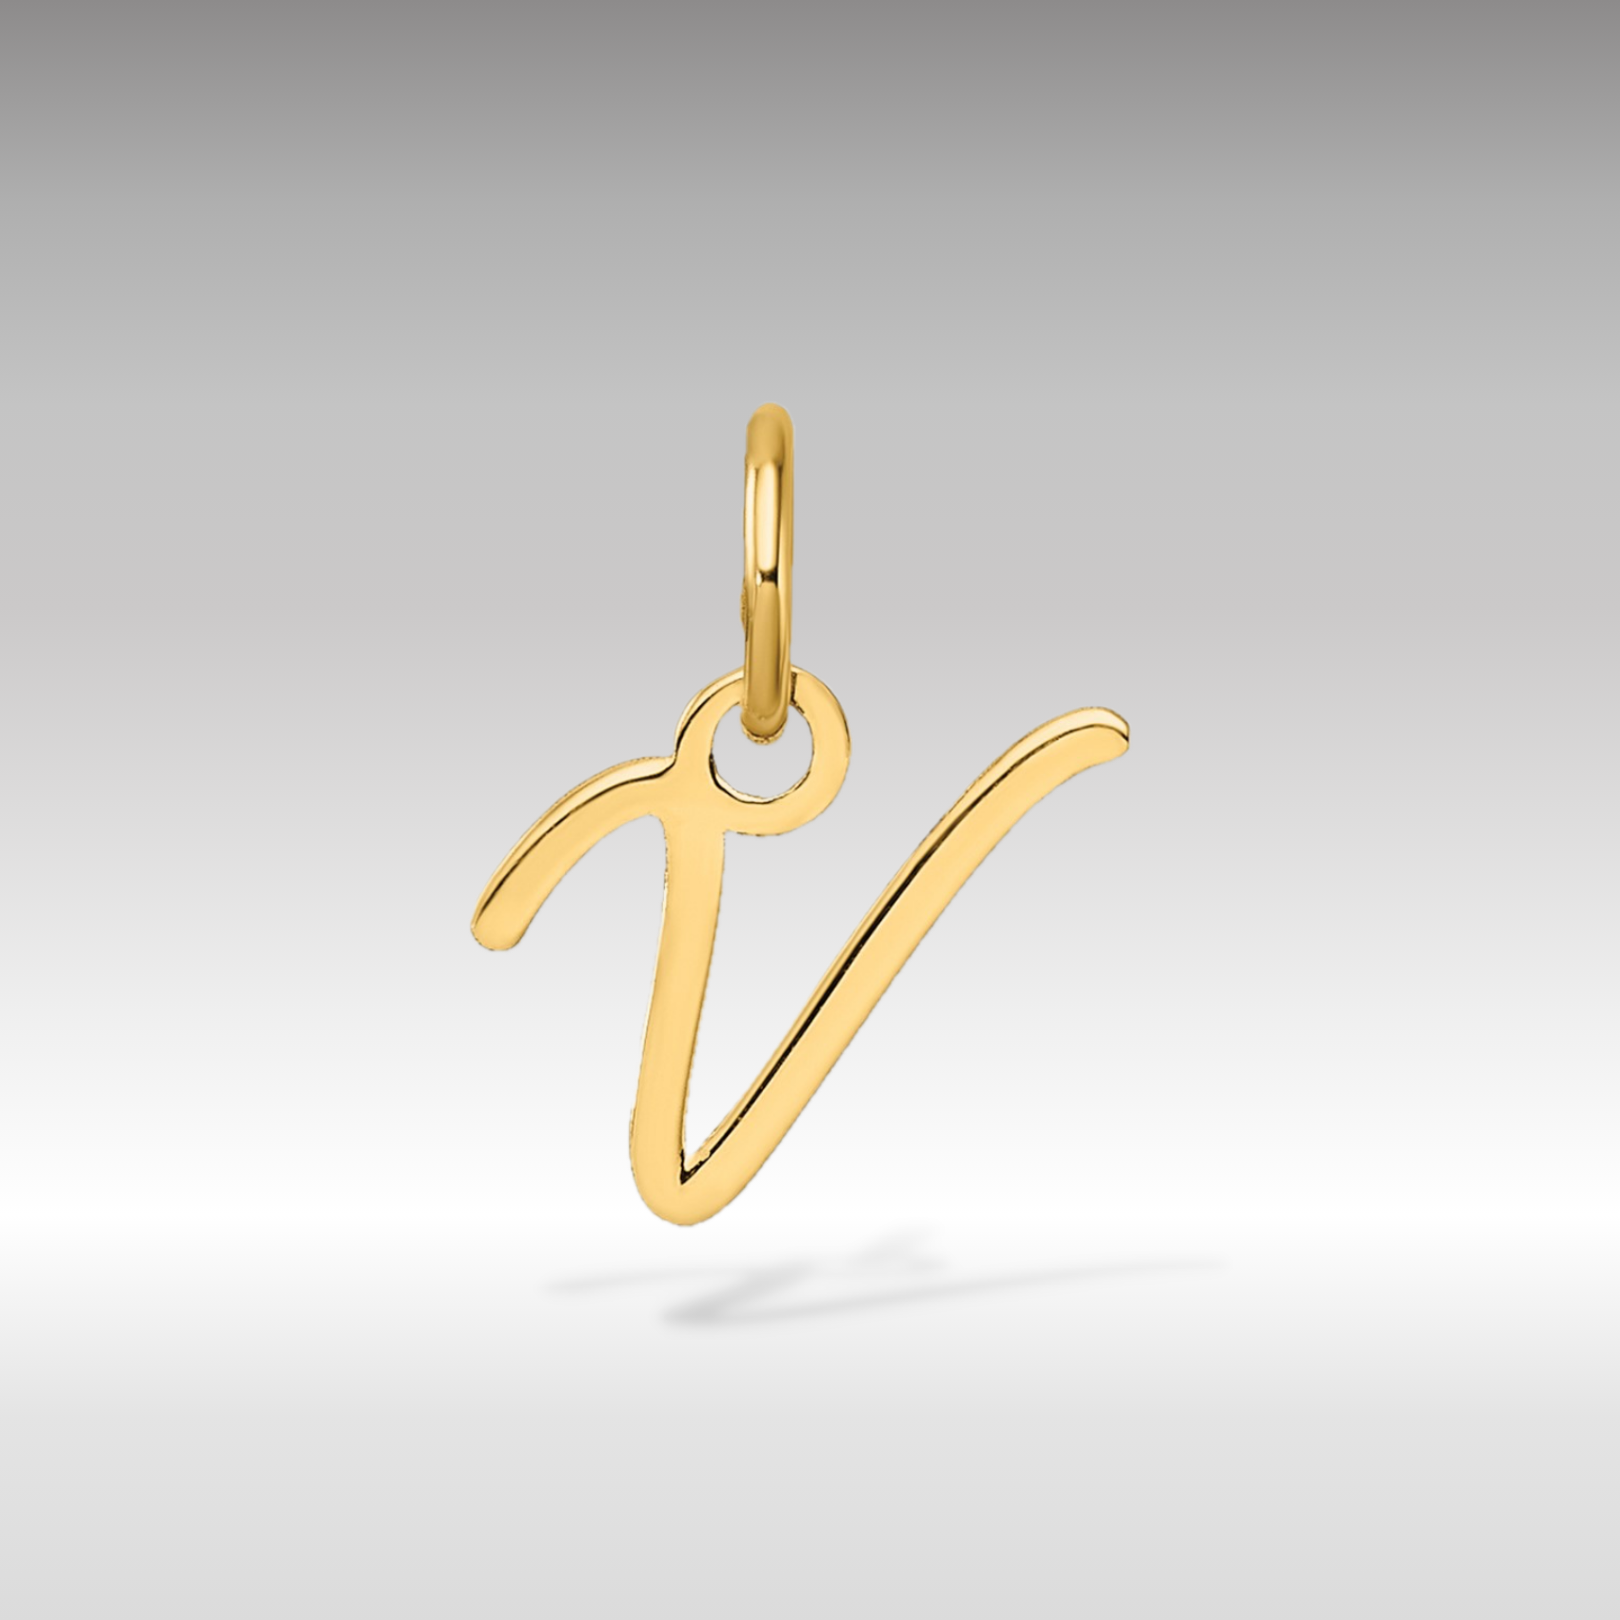 14K Gold Small Script Letter "V" Initial Pendant - Charlie & Co. Jewelry